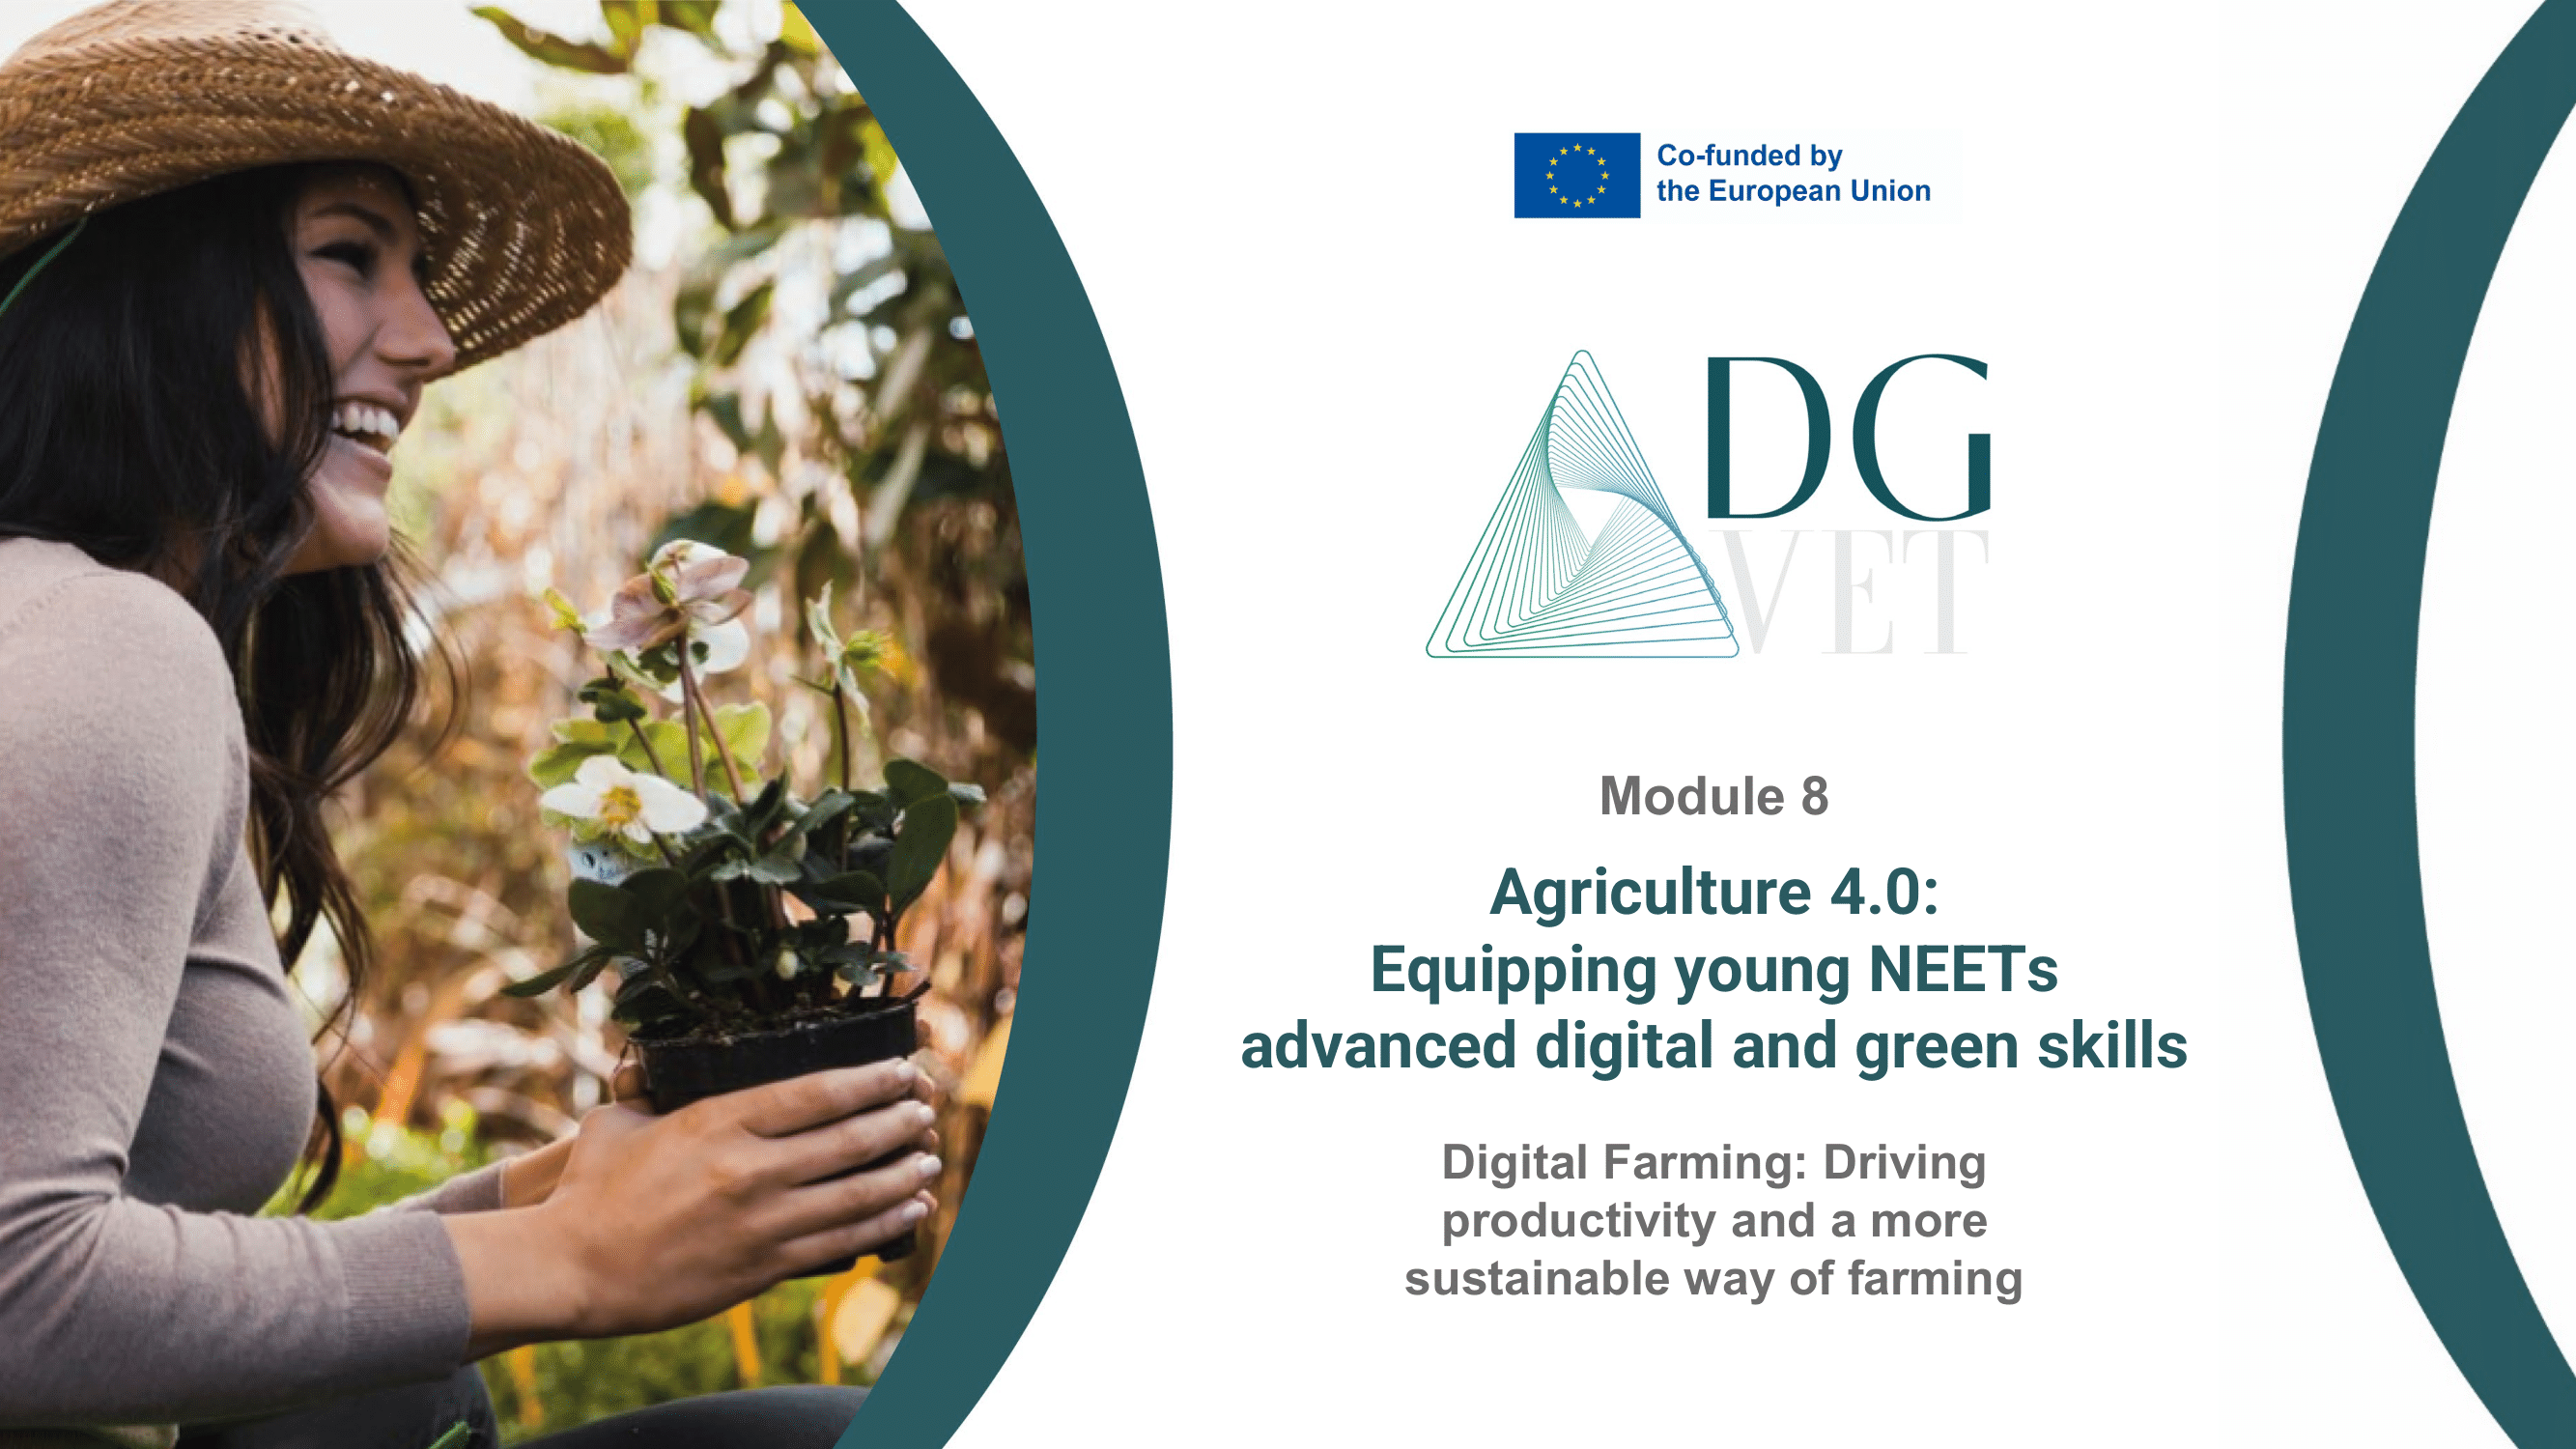 Module 8: “Digital Farming: Driving Productivity and a more sustainable way of farming”